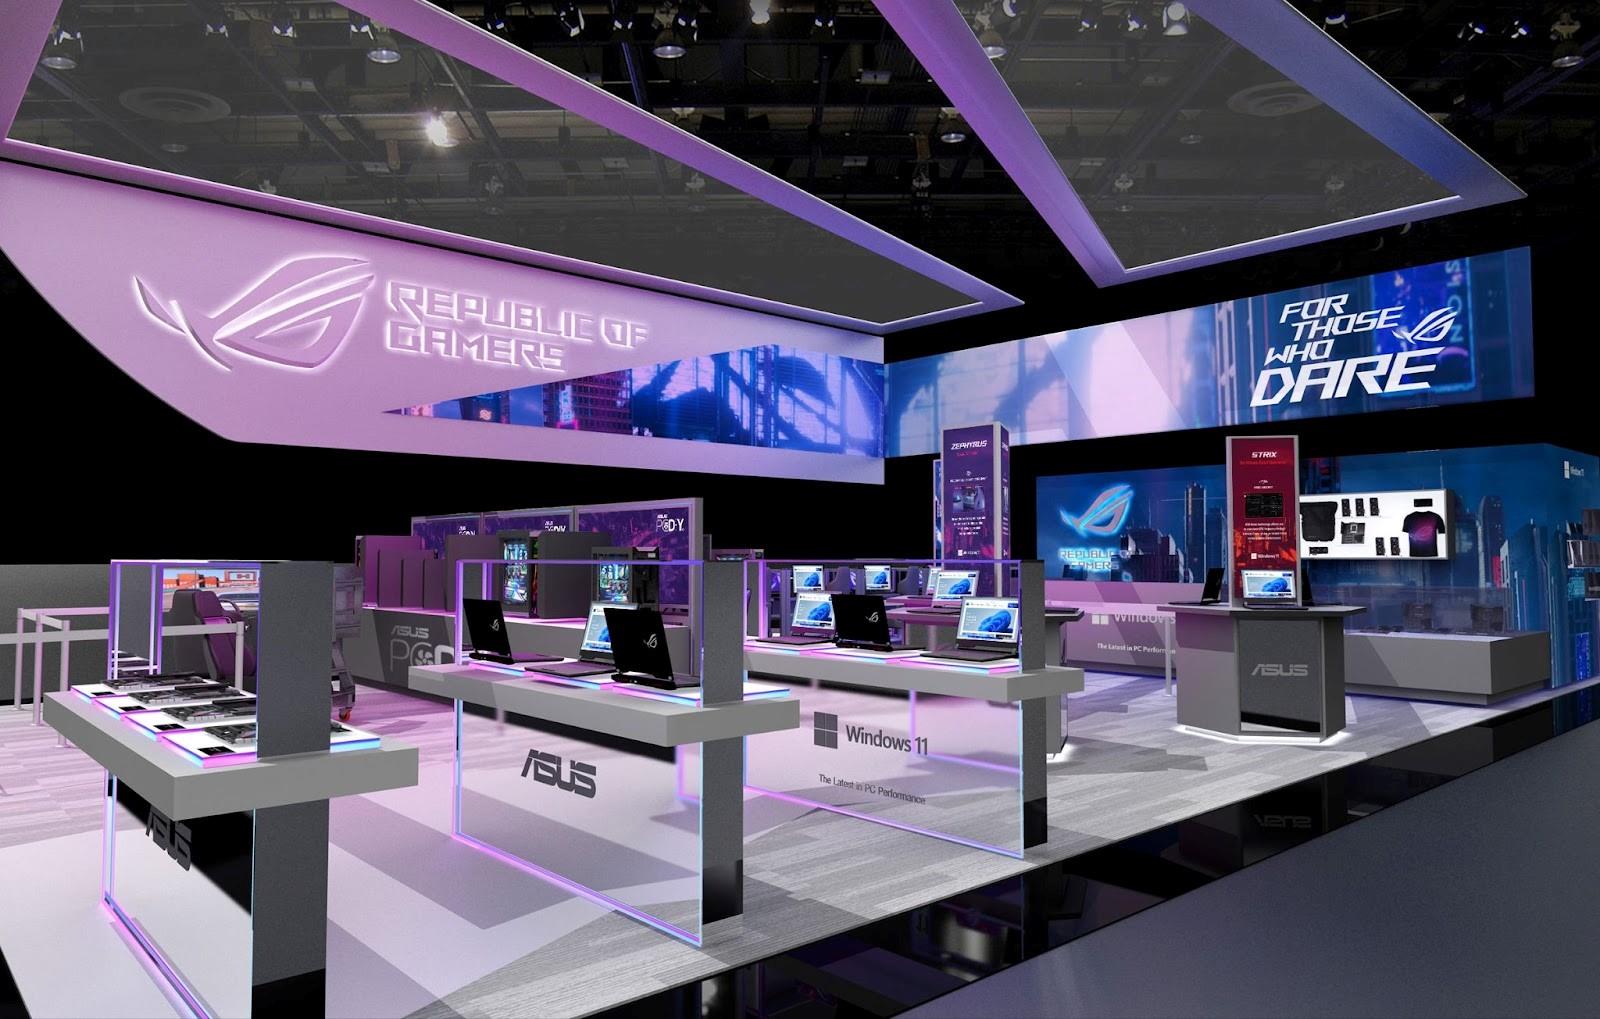 ROG event booth with rows of displays featuring new ROG products